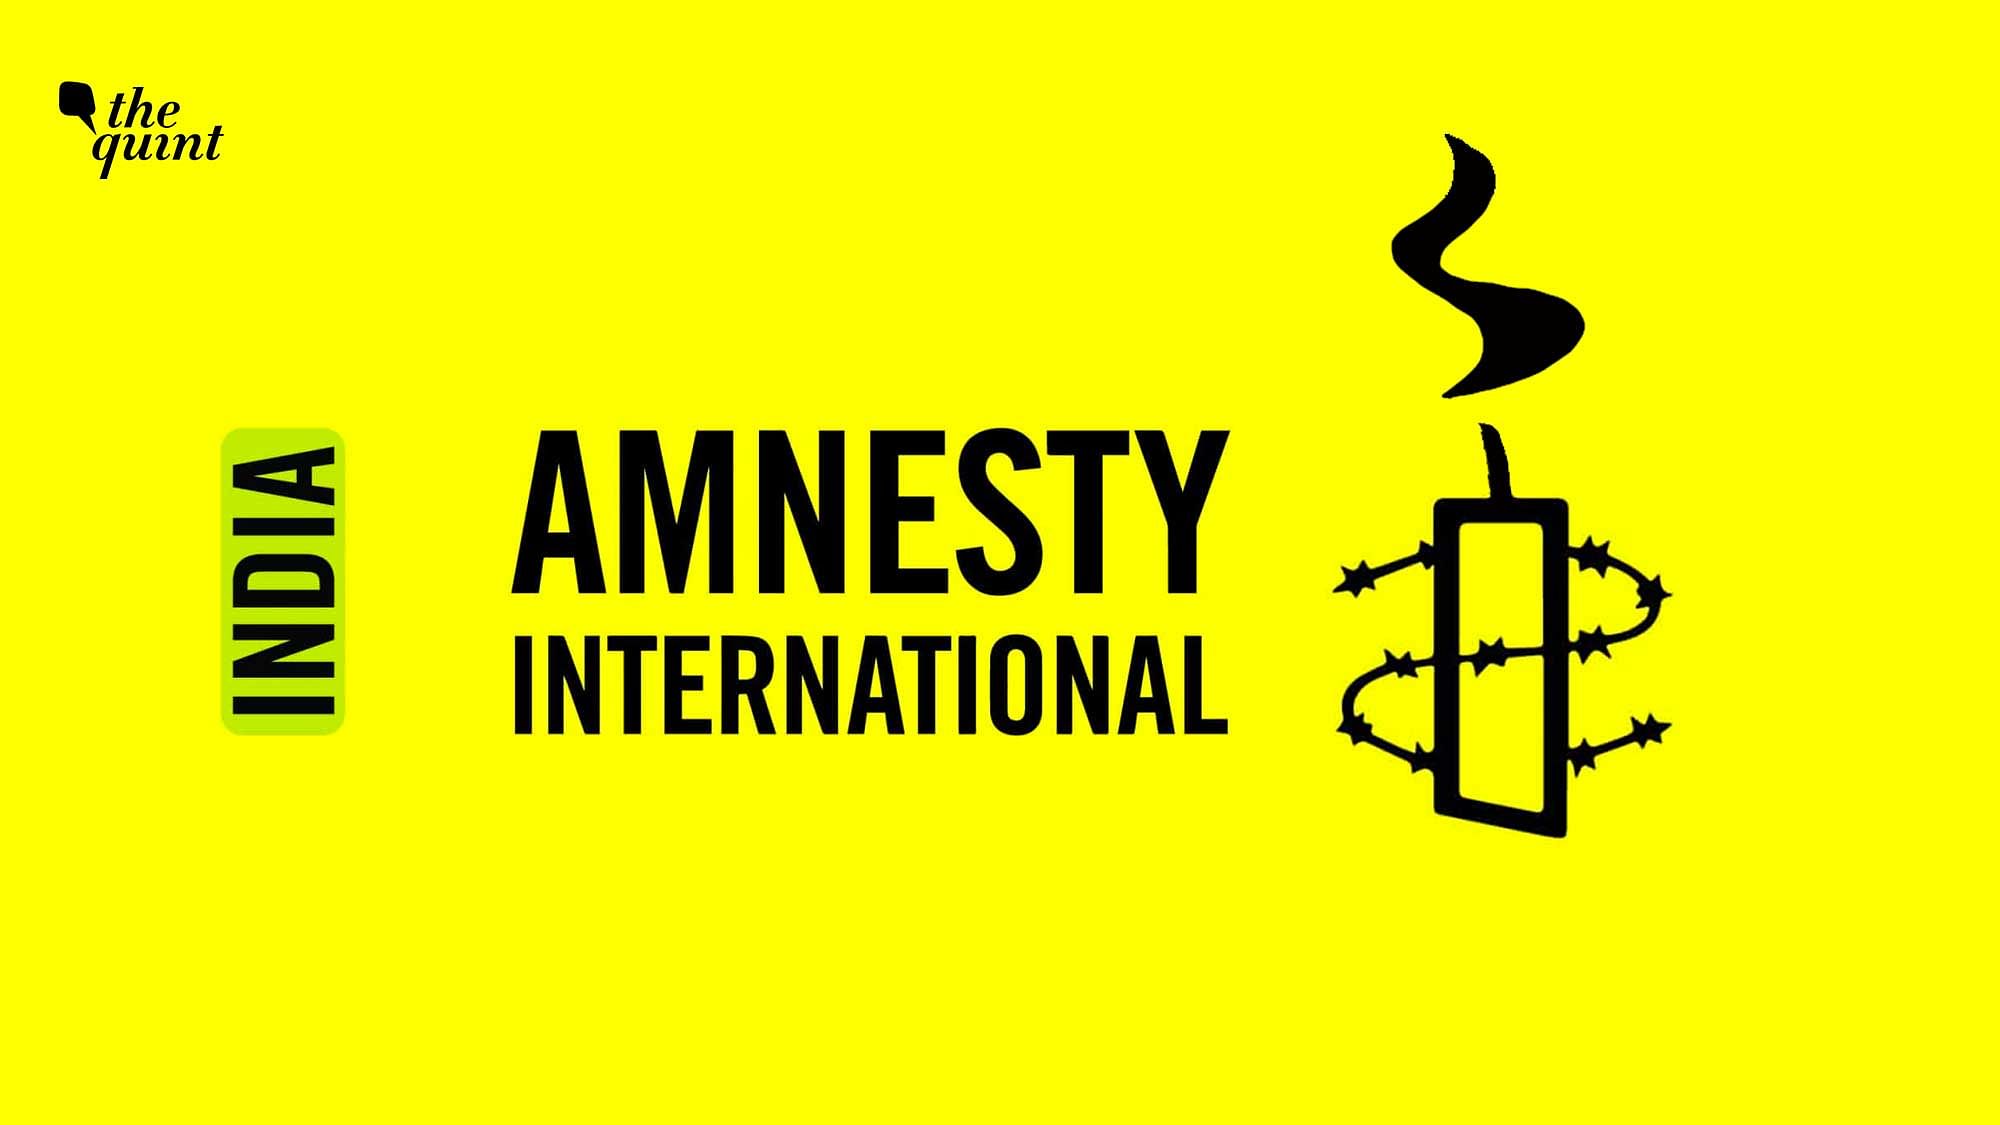 Amnesty International on Tuesday said it is halting all its activities in India due to freezing of its accounts.